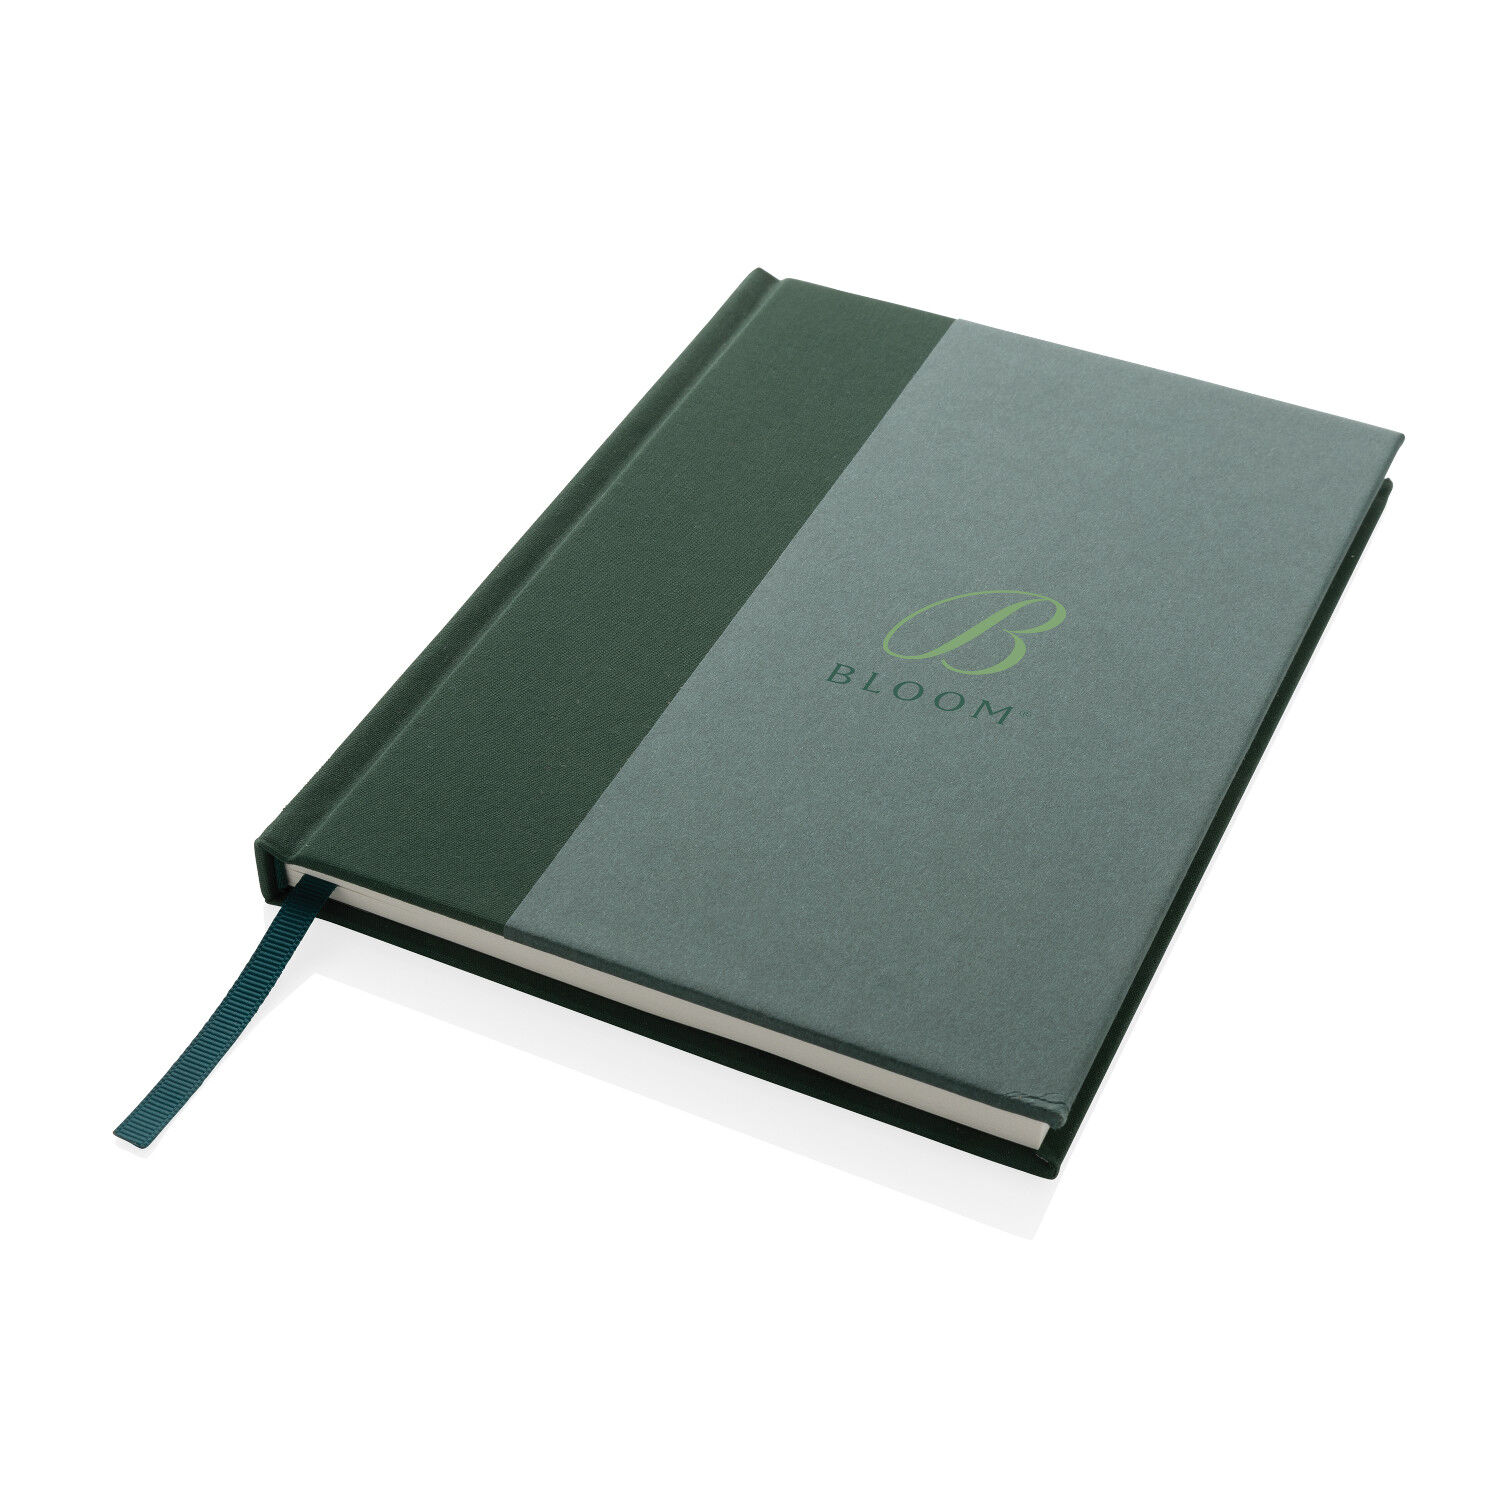 Words A5 Notebook (green with sample branding)